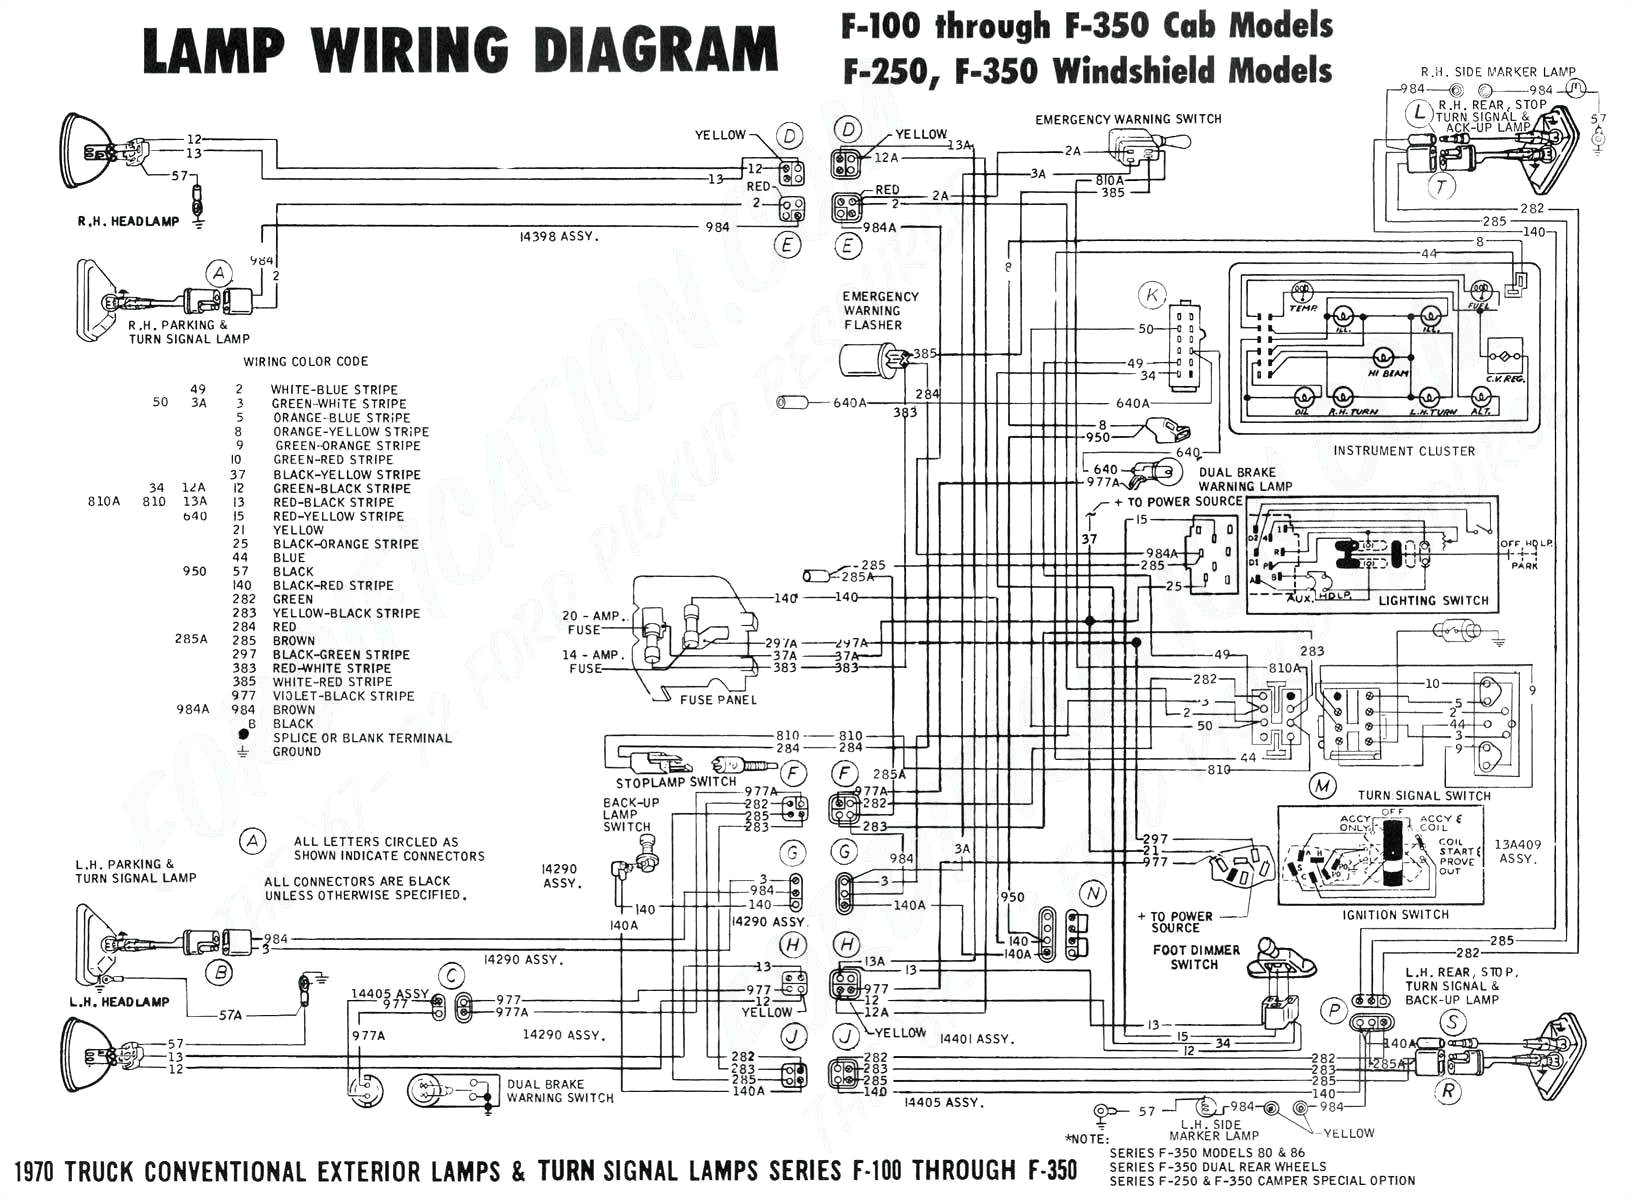 rs232 to rs485onverterircuit diagram usb driver download pdf file what is jpg